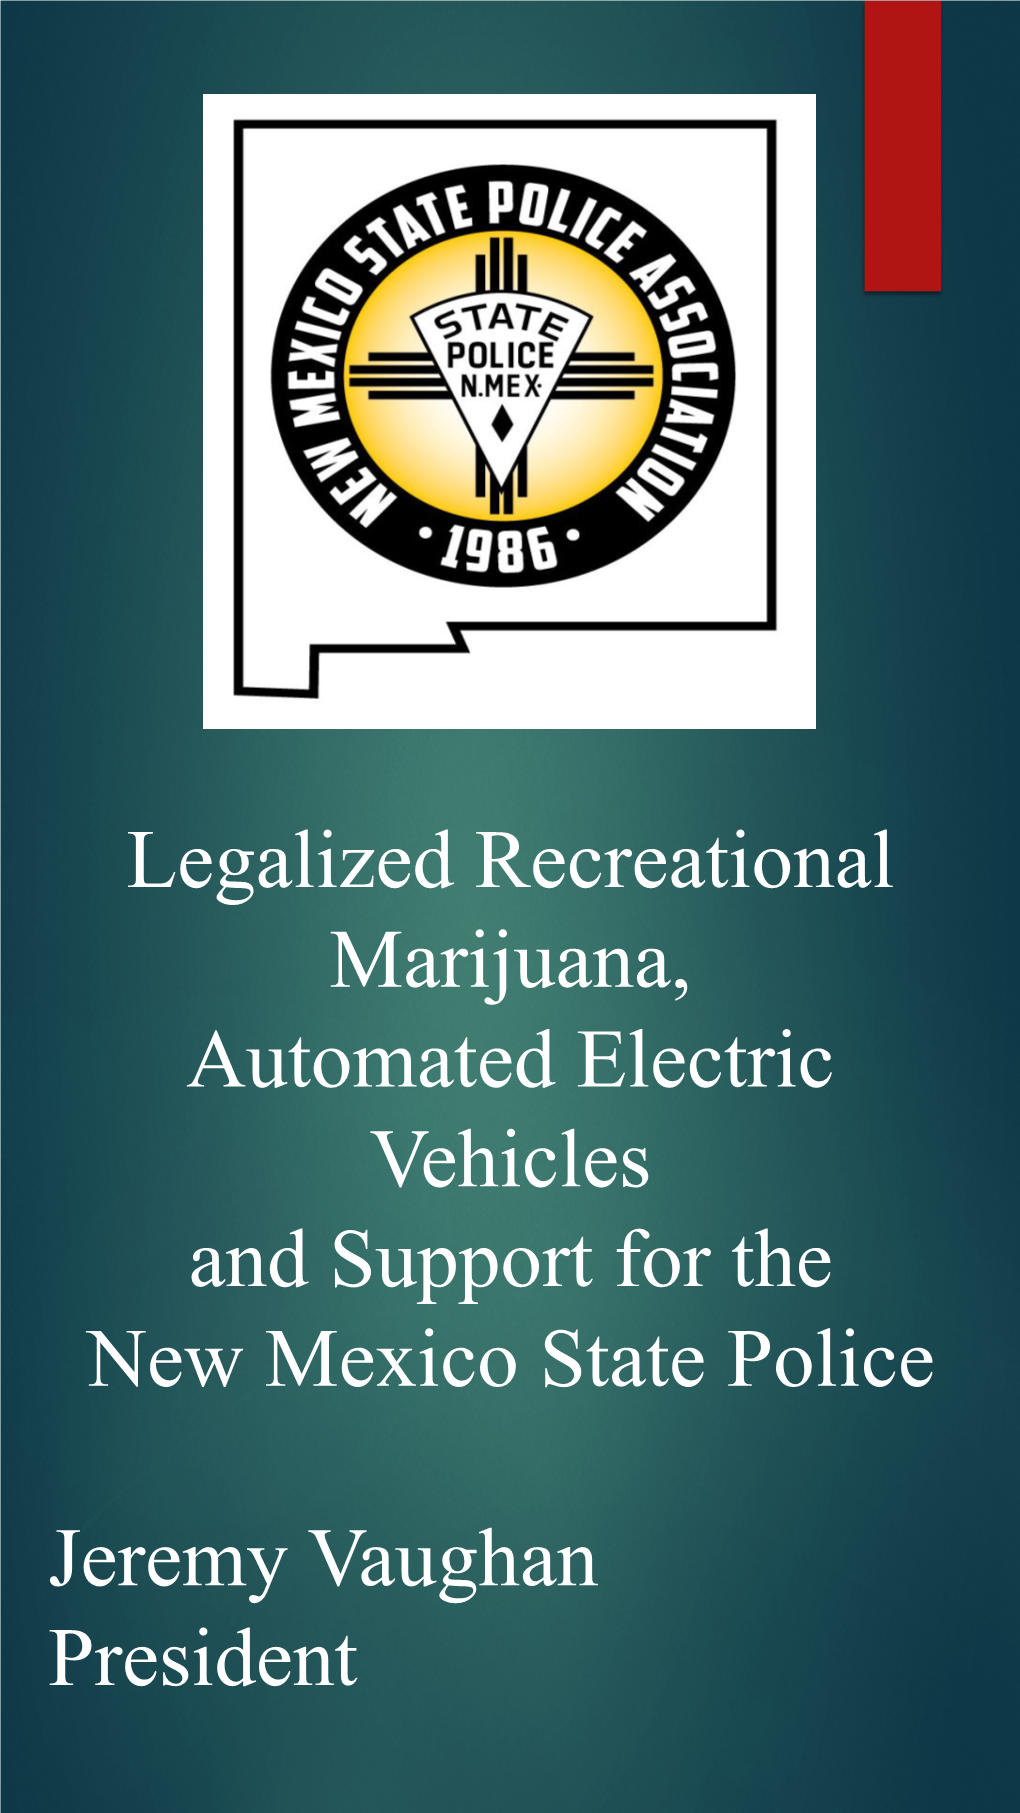 Legalized Recreational Marijuana, Automated Electric Vehicles and Support for the New Mexico State Police